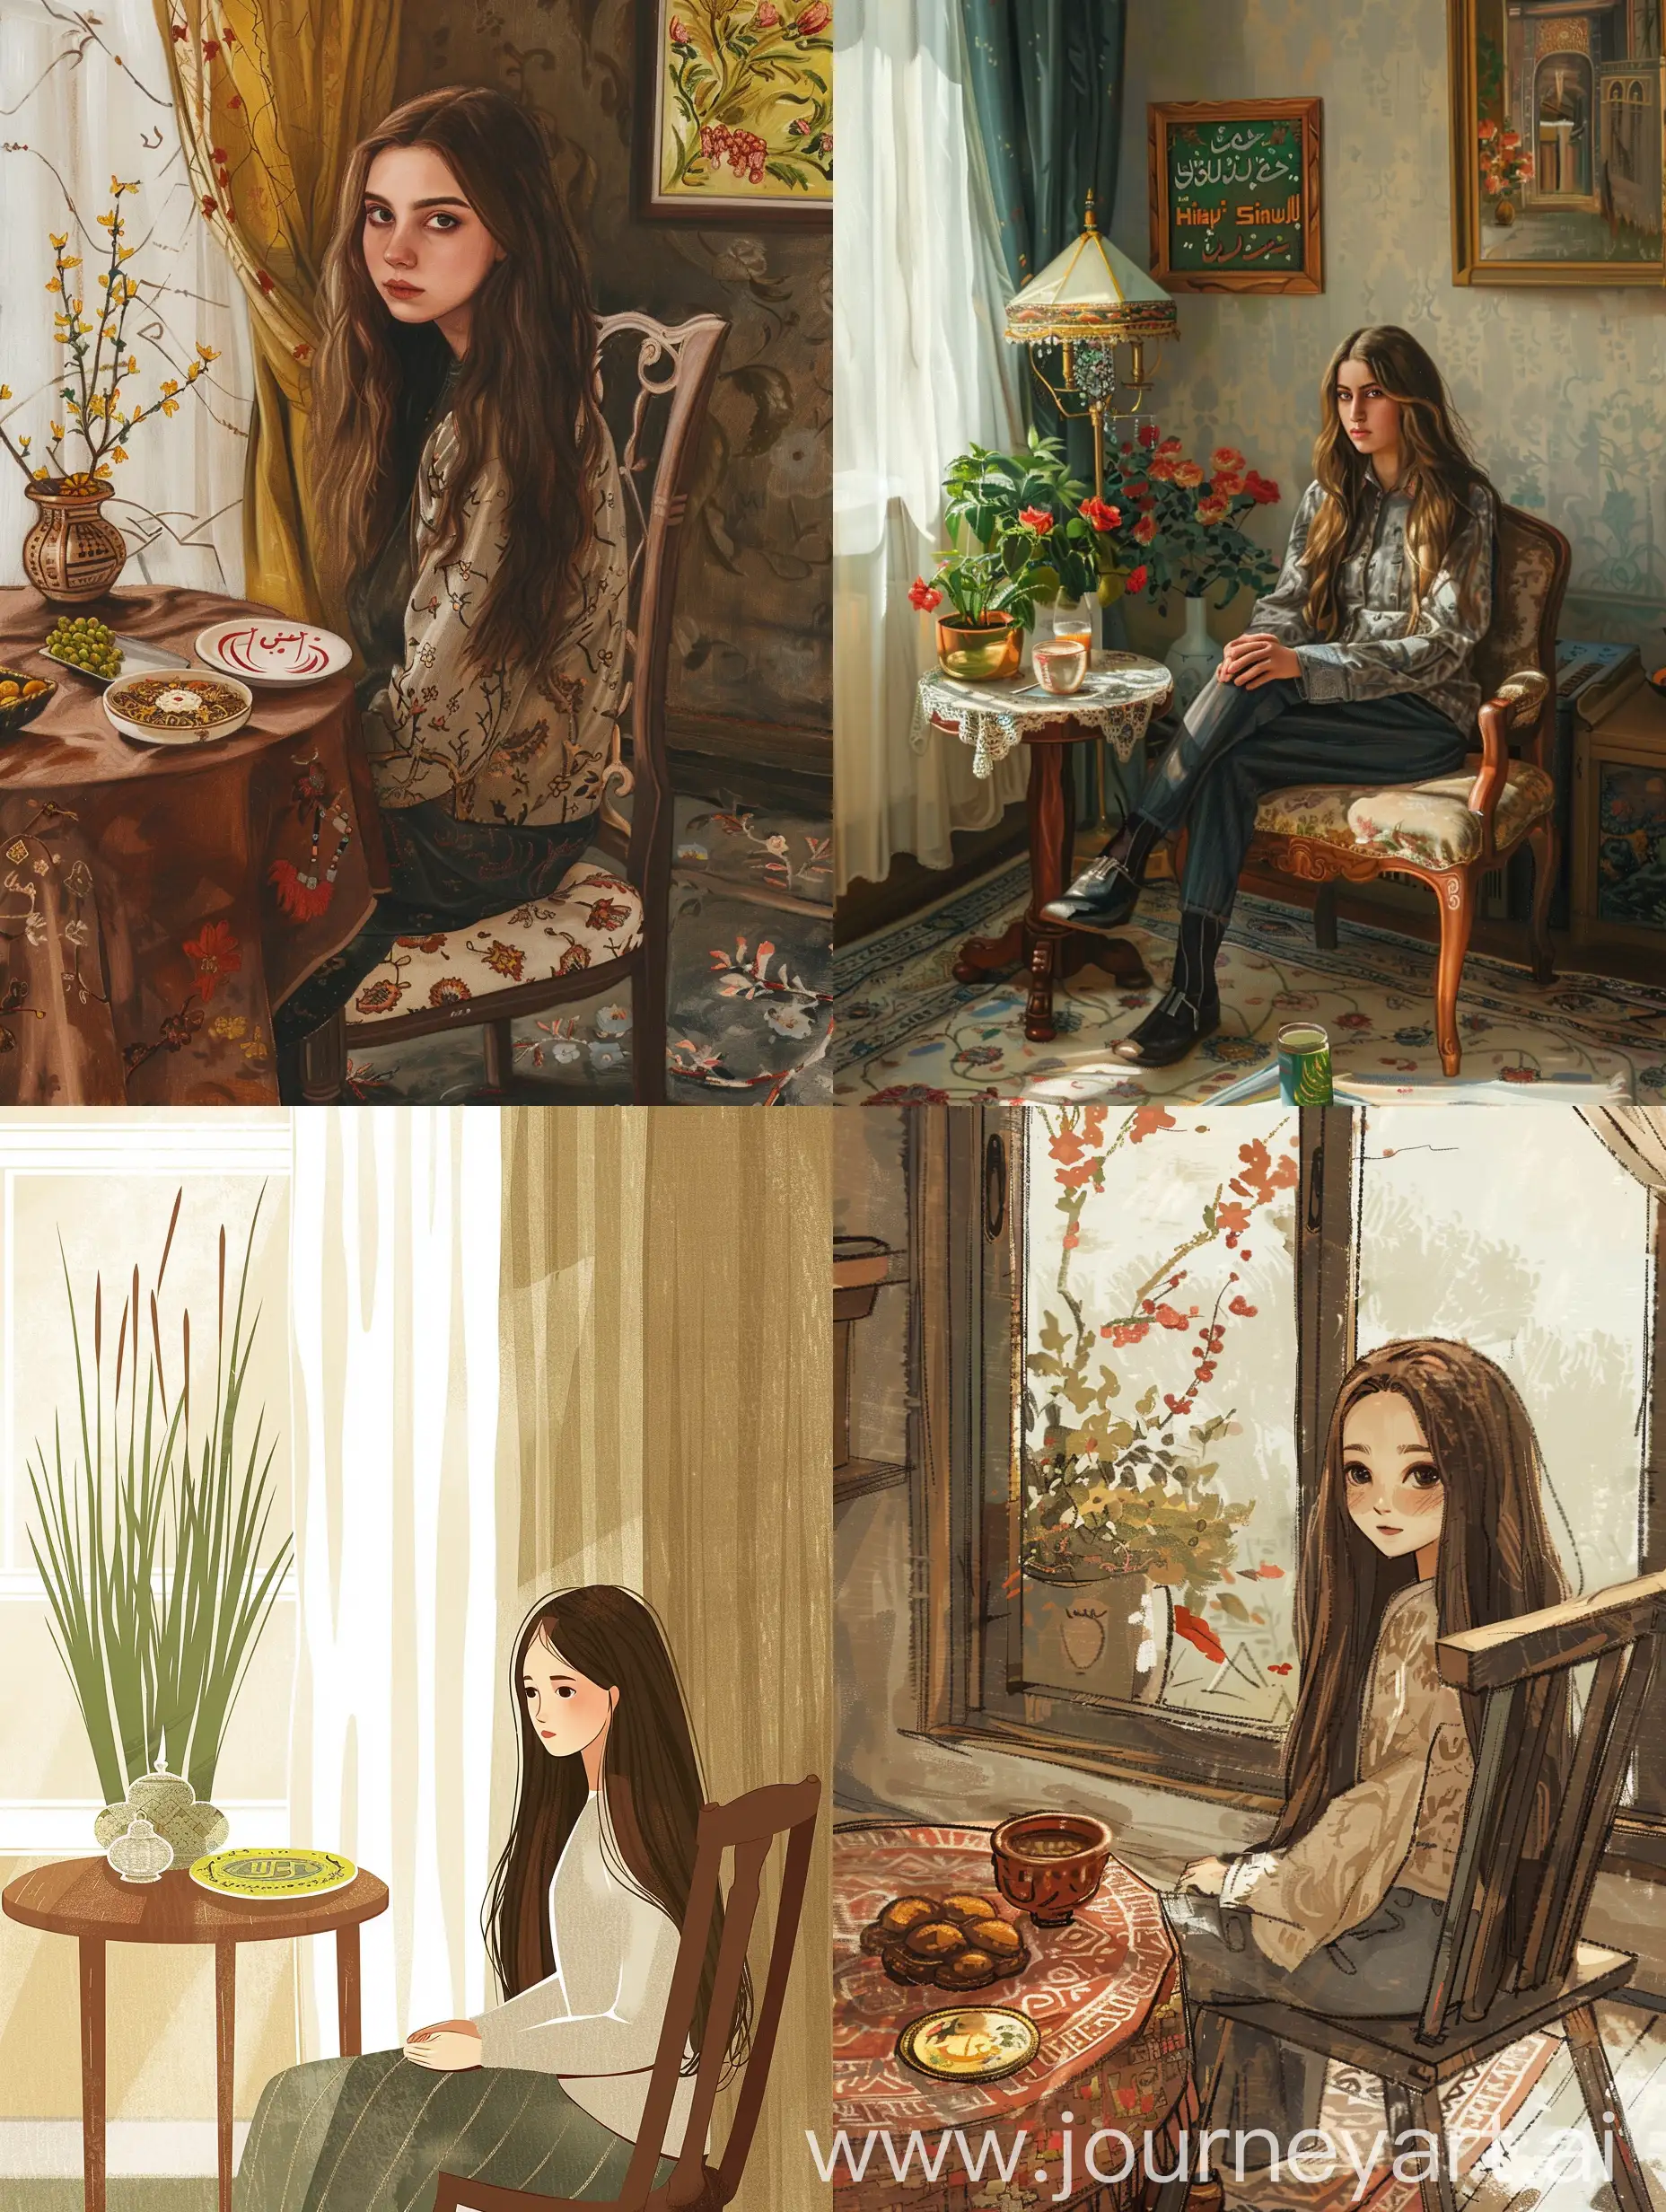 A 40-year-old girl is sitting alone in the room on a chair and there is a table next to her, on which is the Iranian Haft Sin Nowruz. The girl with long brown hair is looking at us